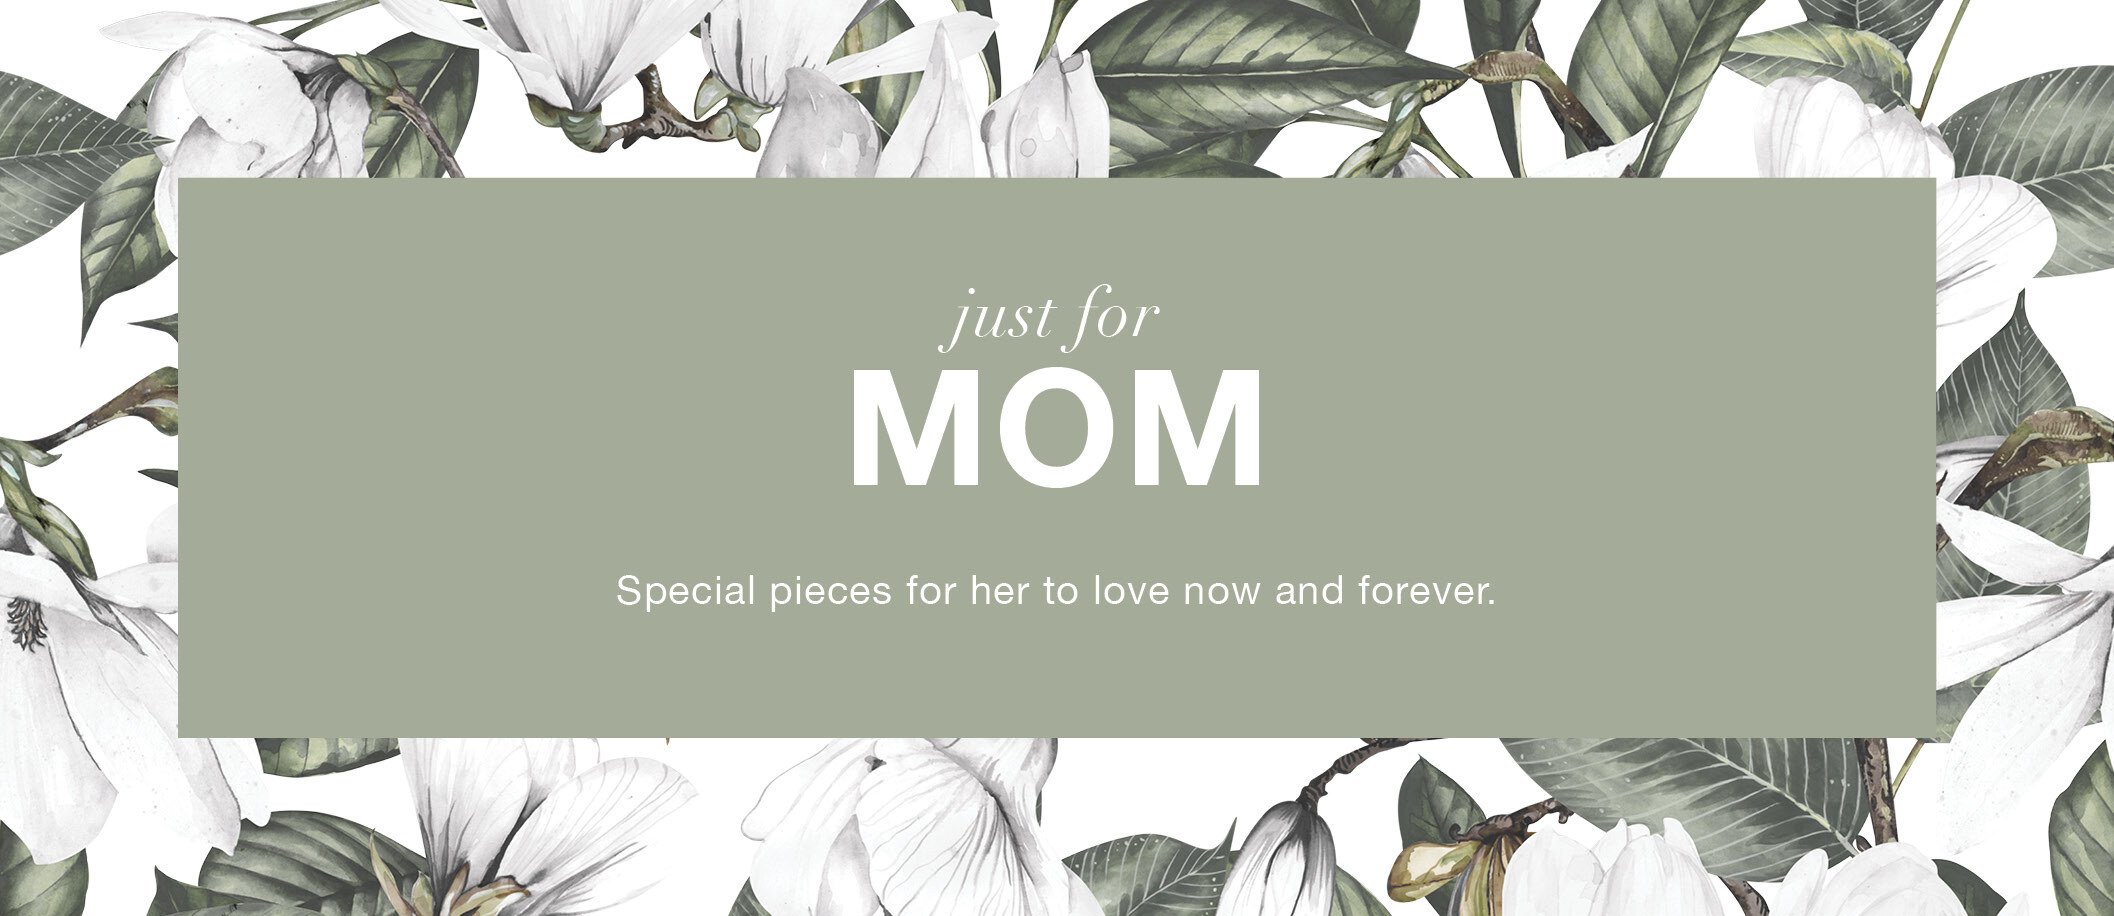 Just for Mom